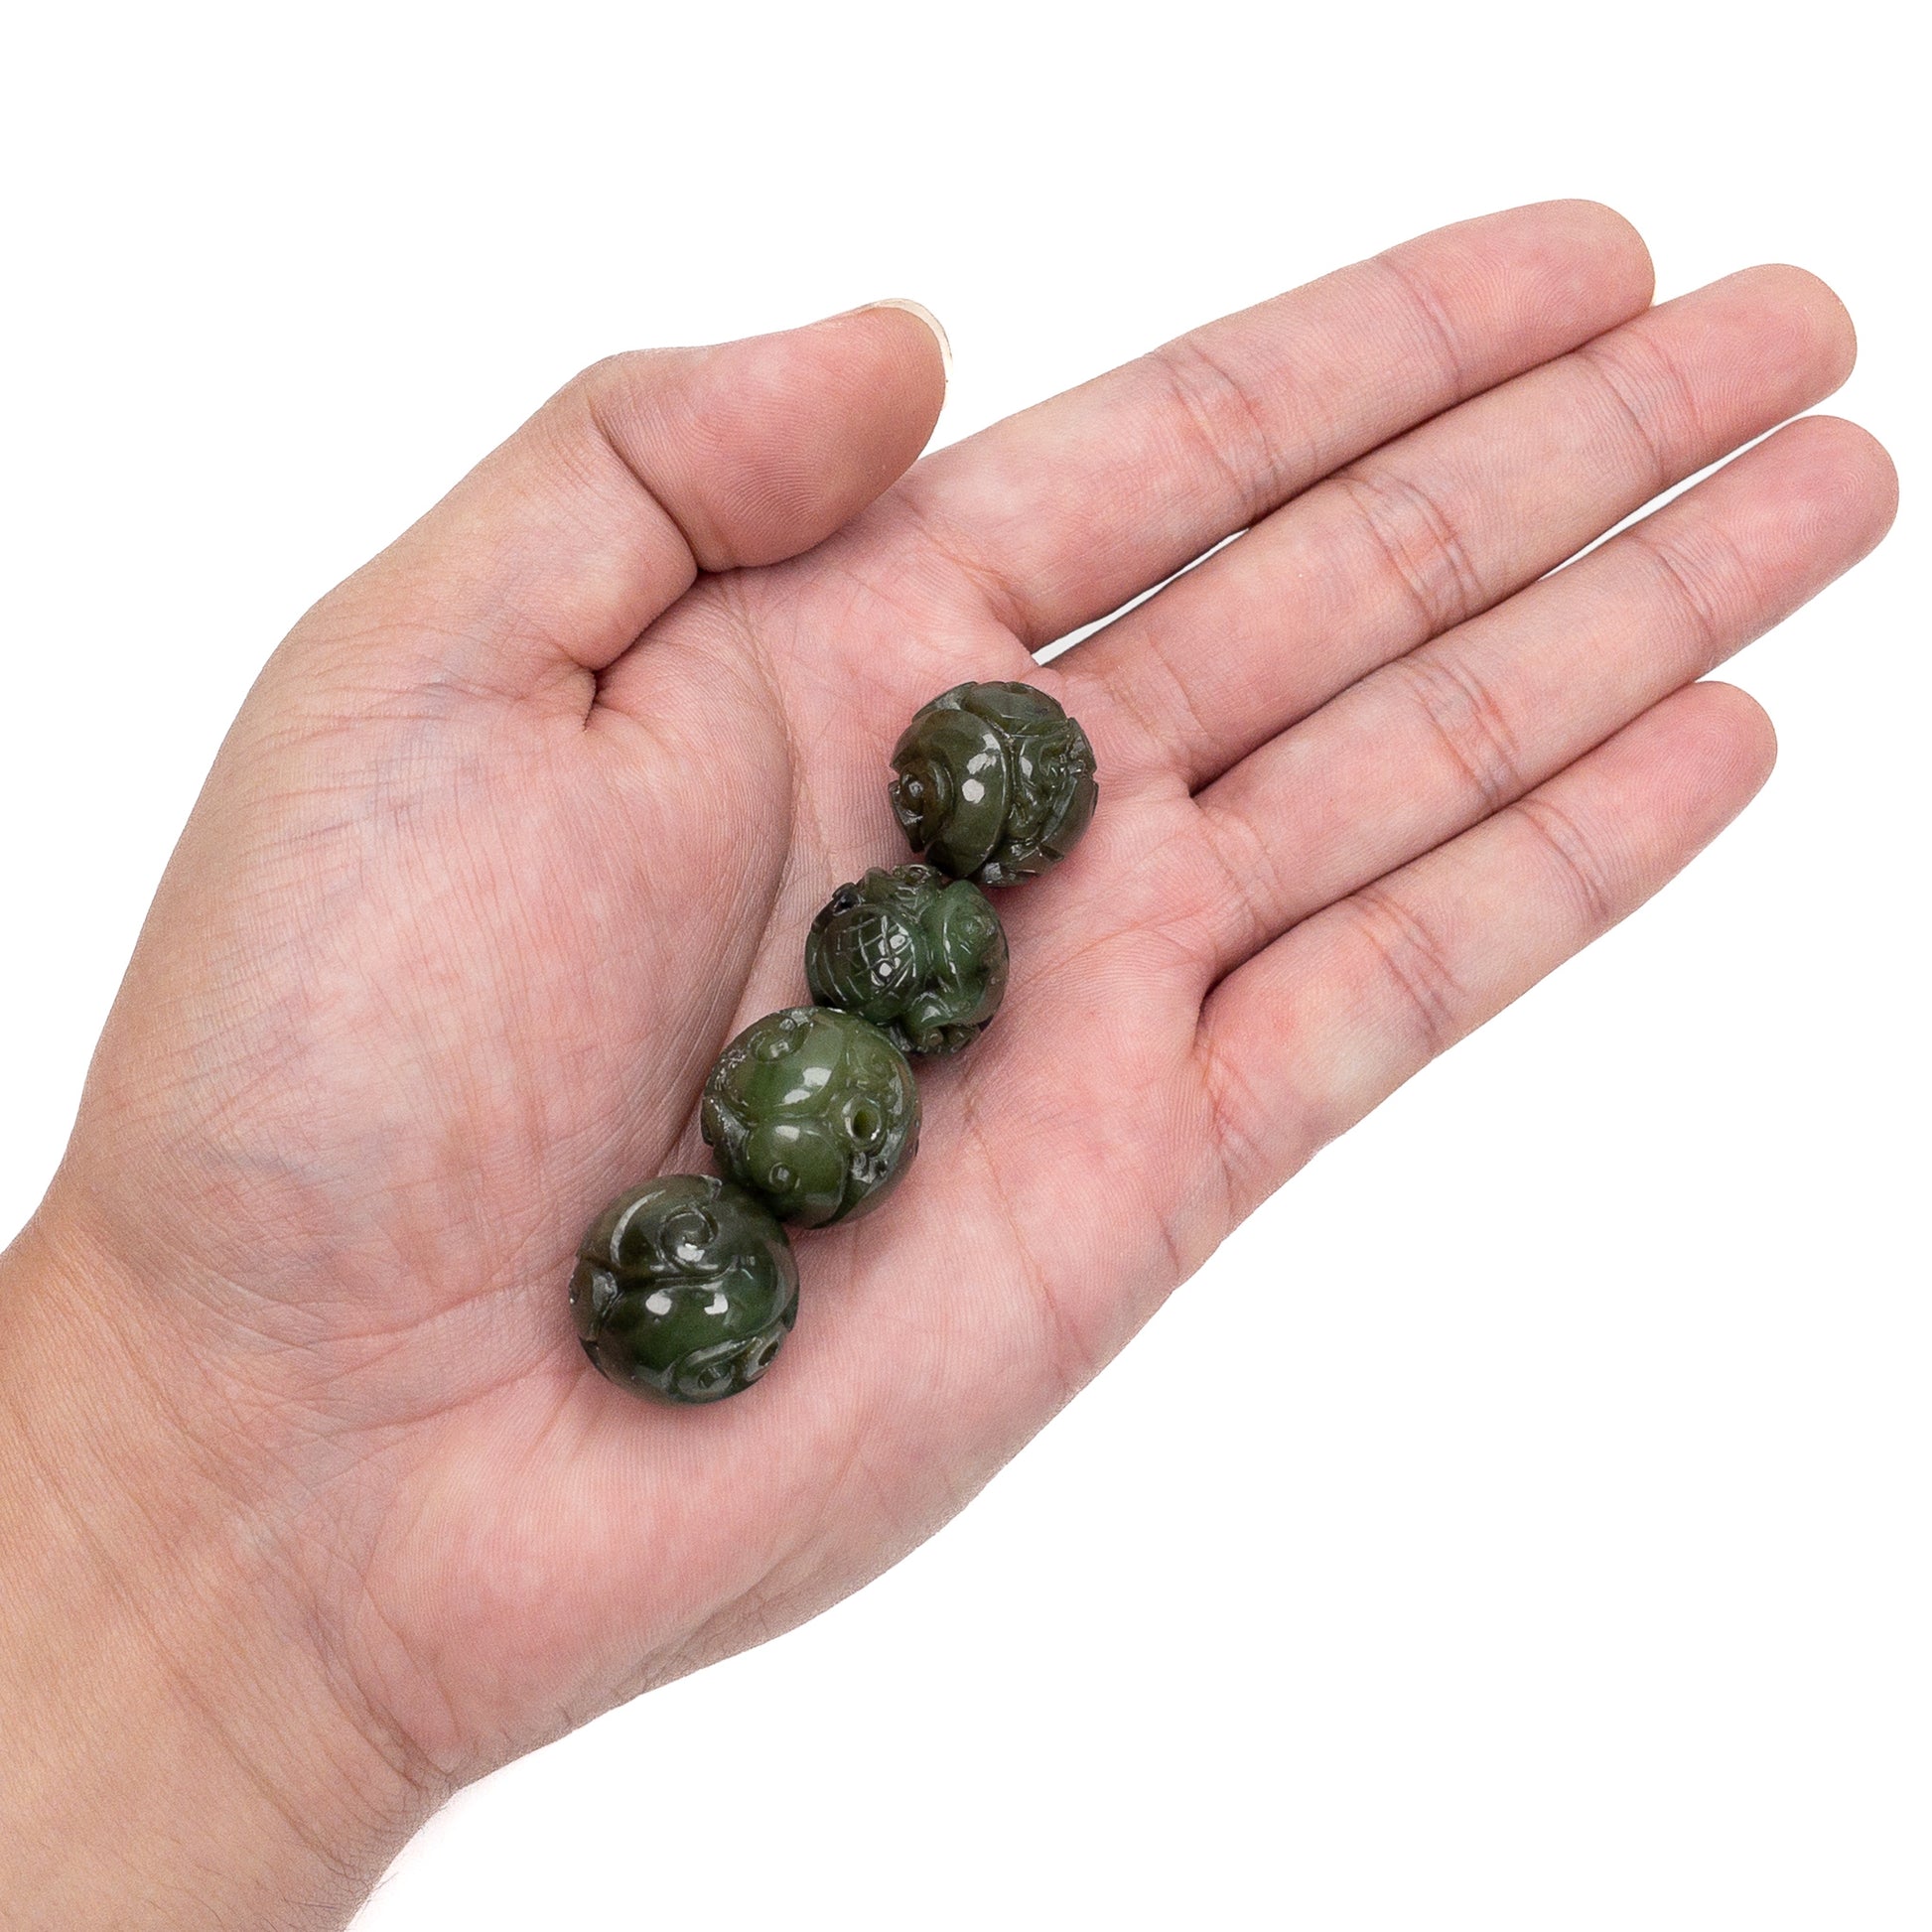 Canadian Jade 18mm Carved Round Bead - 1 pc.